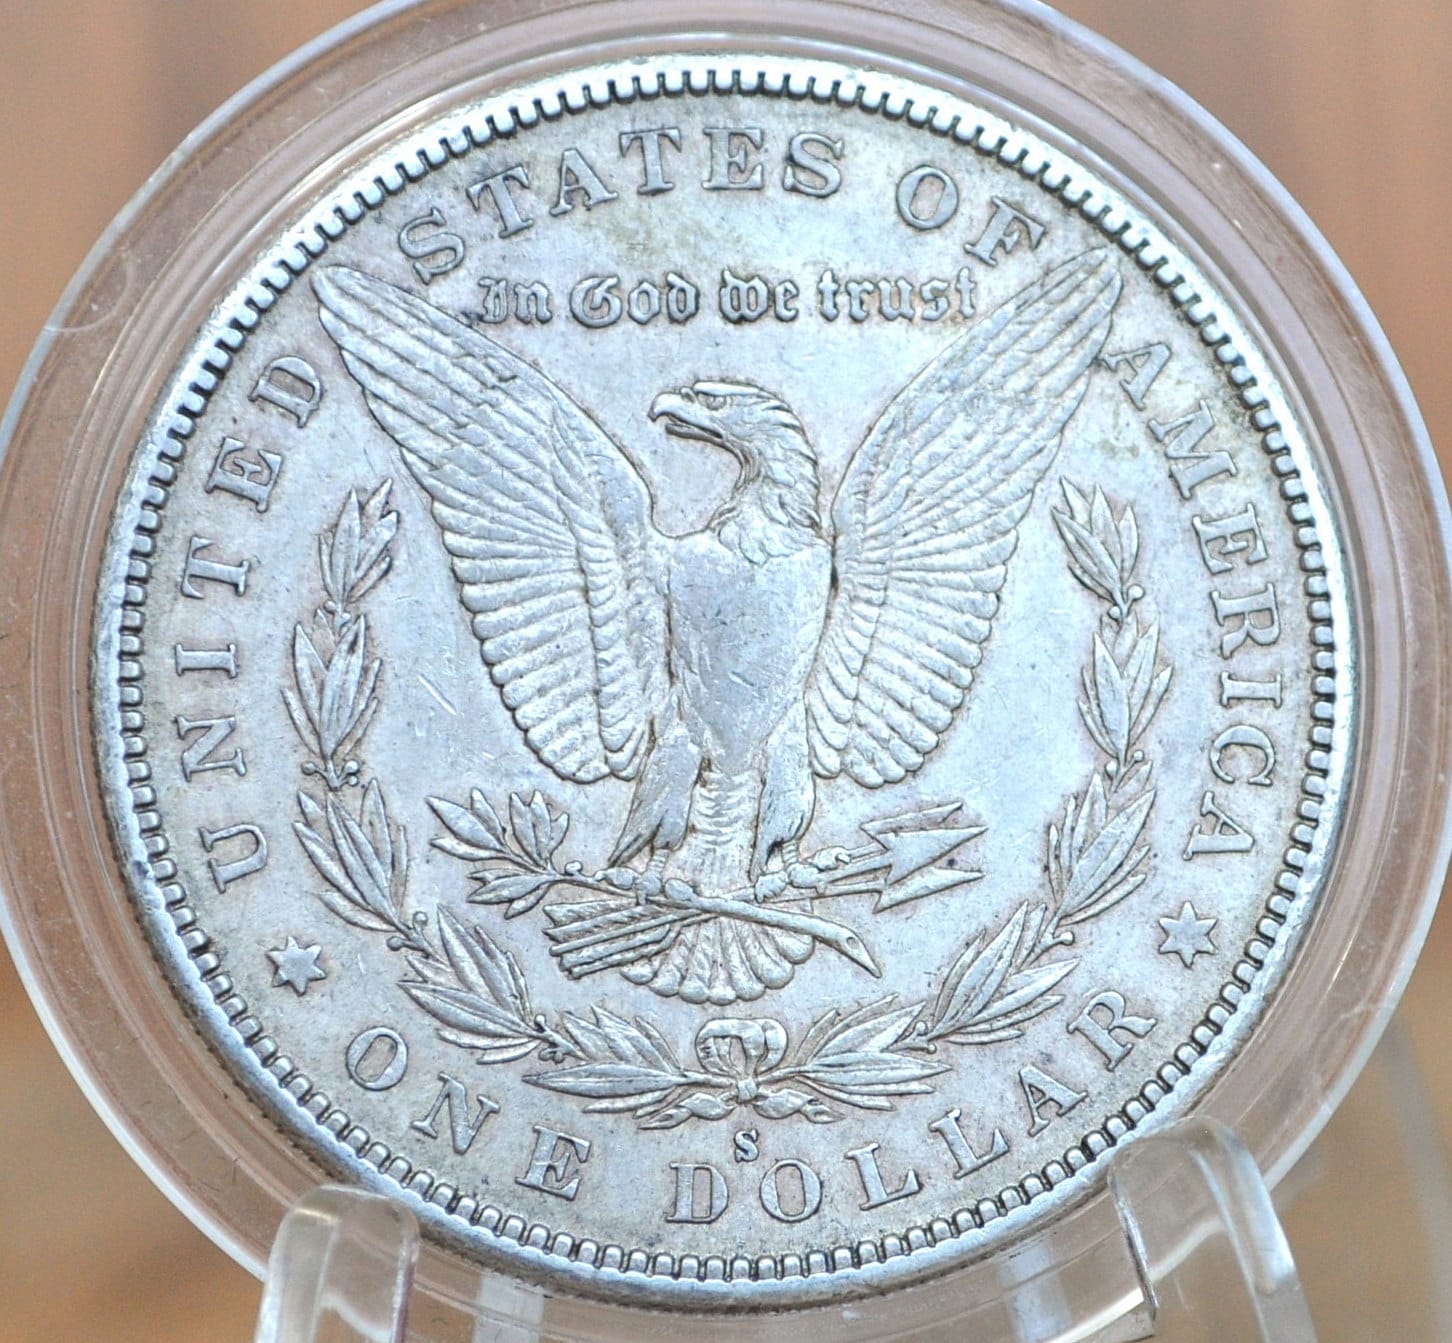 1885-S Morgan Silver Dollar - AU (About Uncirculated) Grade, Tough Date! - 1885 S Morgan Dollar Silver Dollar 1885S - Low Mintage Date